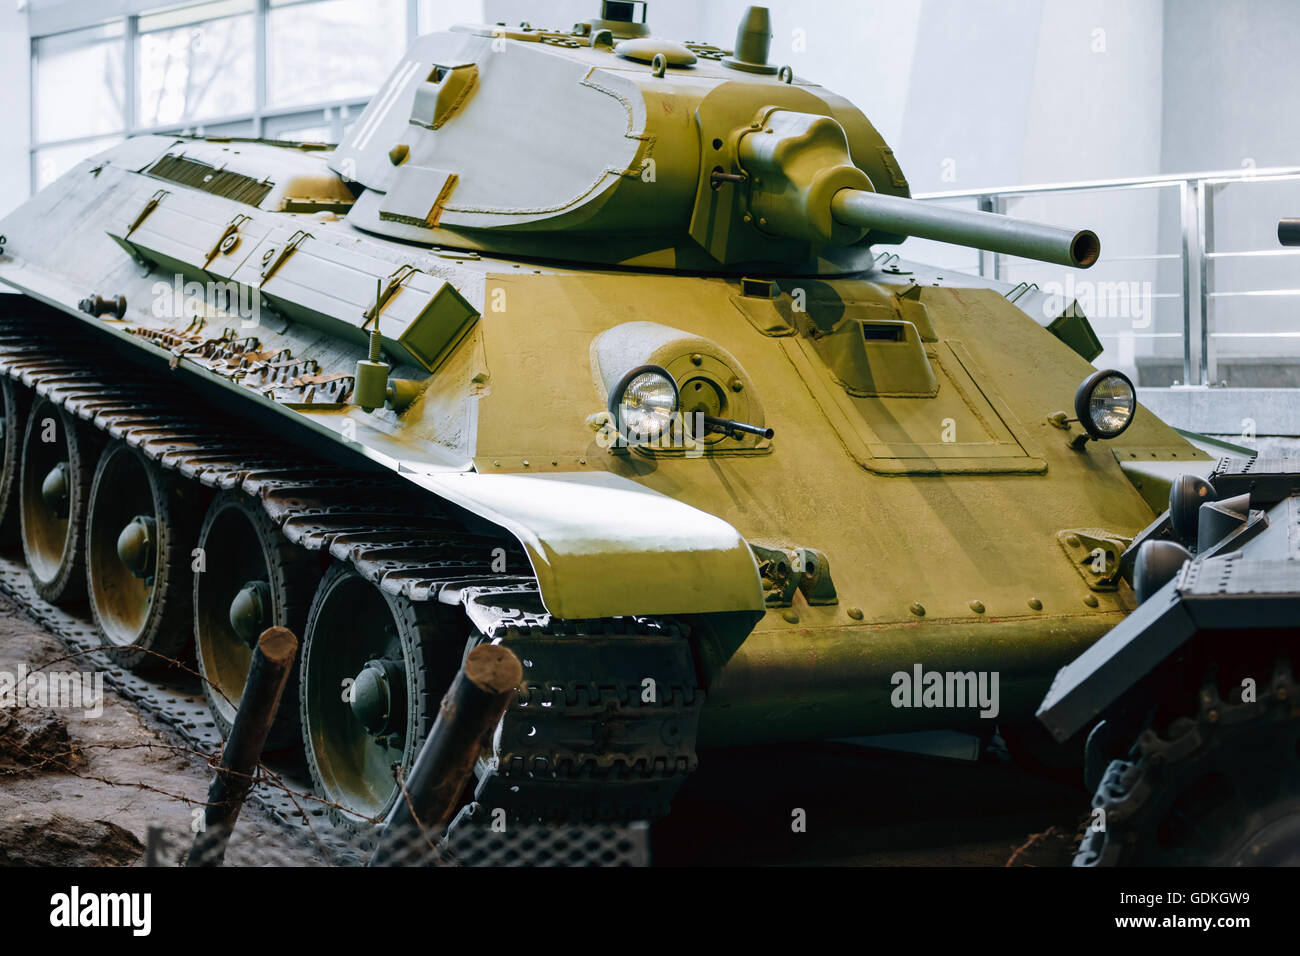 T-34 was a Soviet medium tank at exposure Of Weapons And Equipment In The Belarusian Museum Of The Great Patriotic War in Minsk, Stock Photo